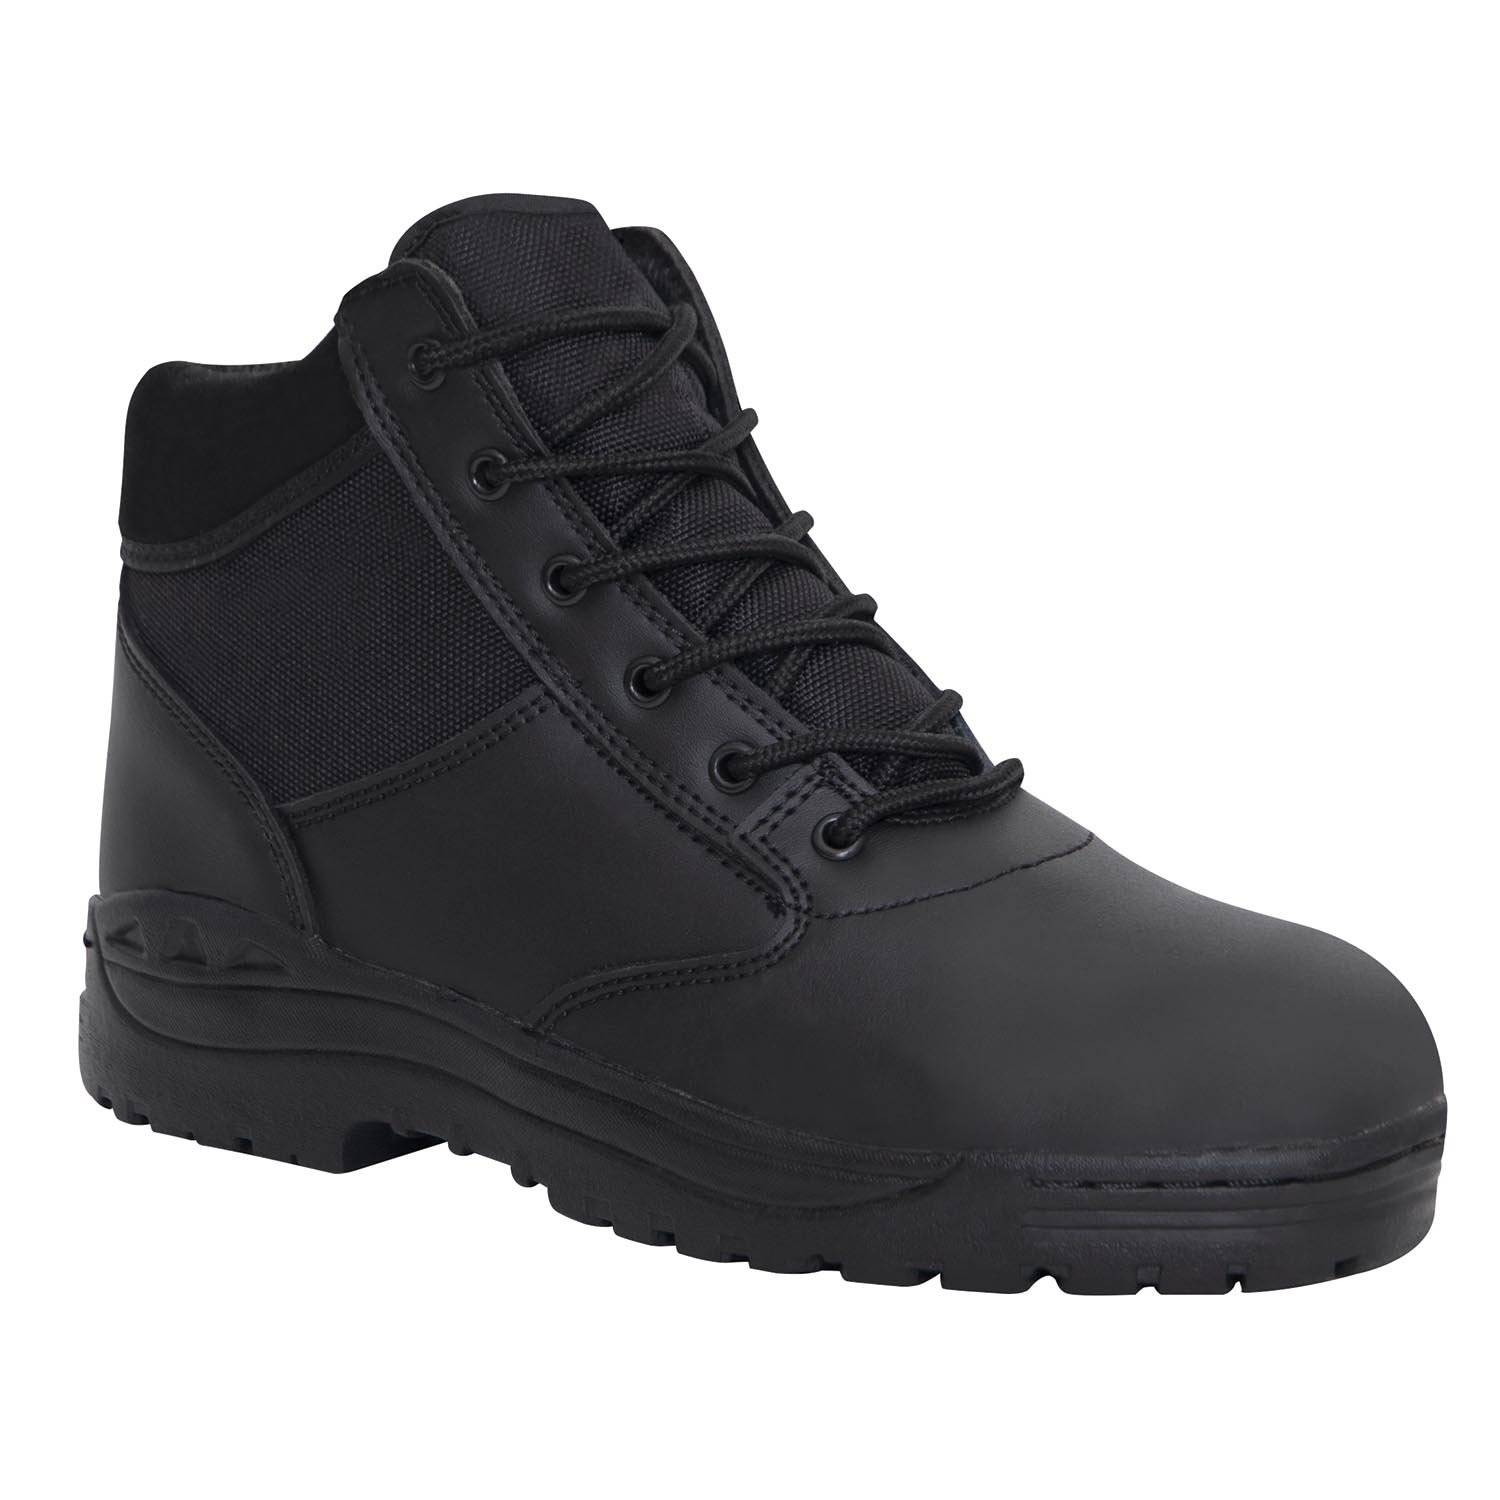 Rothco 6" Forced Entry Security Boots